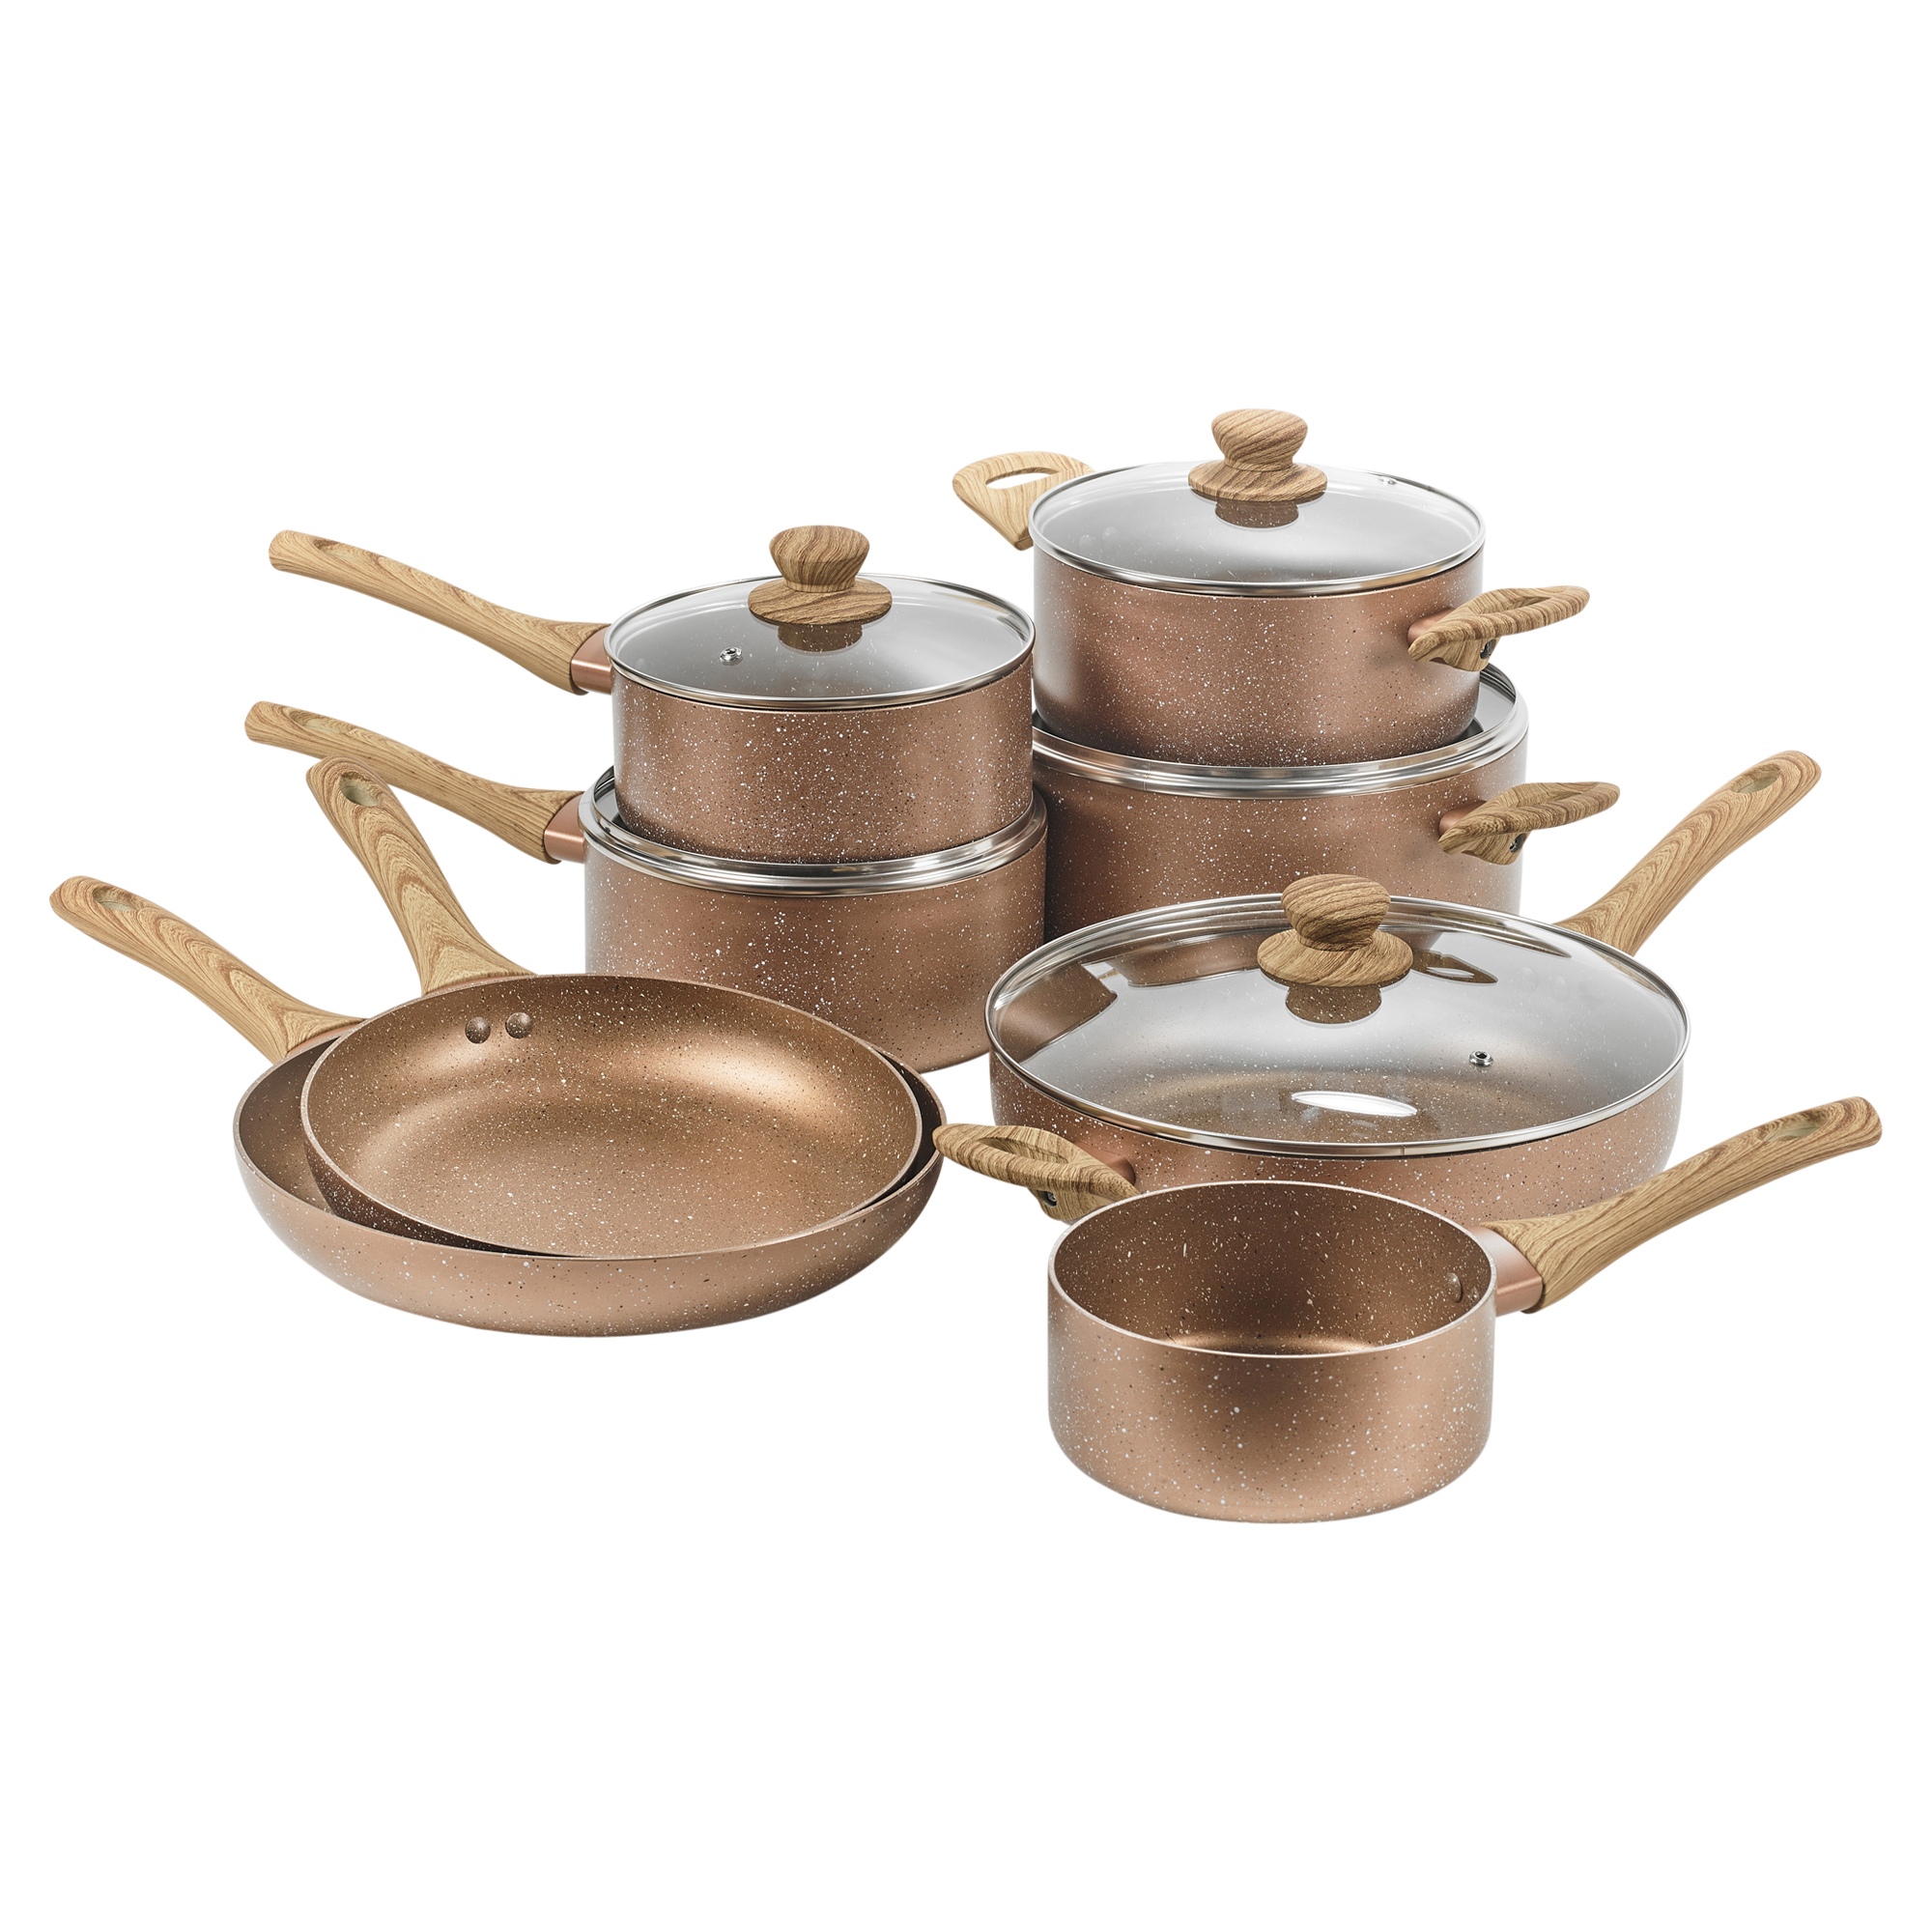 https://www.easygiftproducts.co.uk/63993/urbn-chef-rose-gold-pots-pans-with-wood-look-handles.jpg